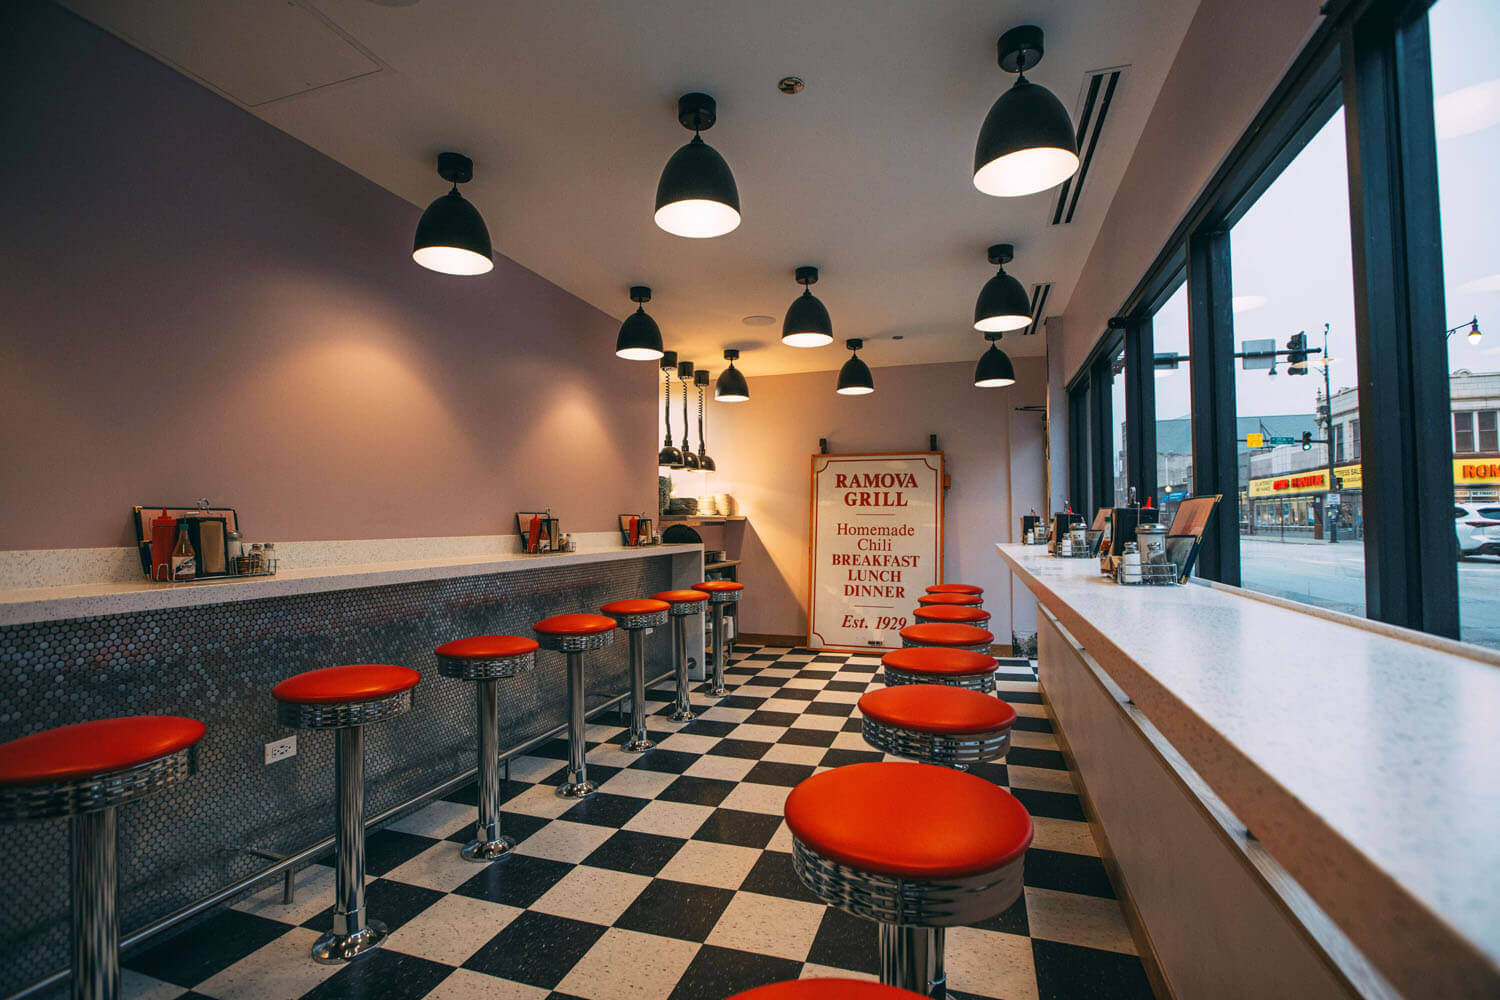 Image of a modern diner, with retro style seating.